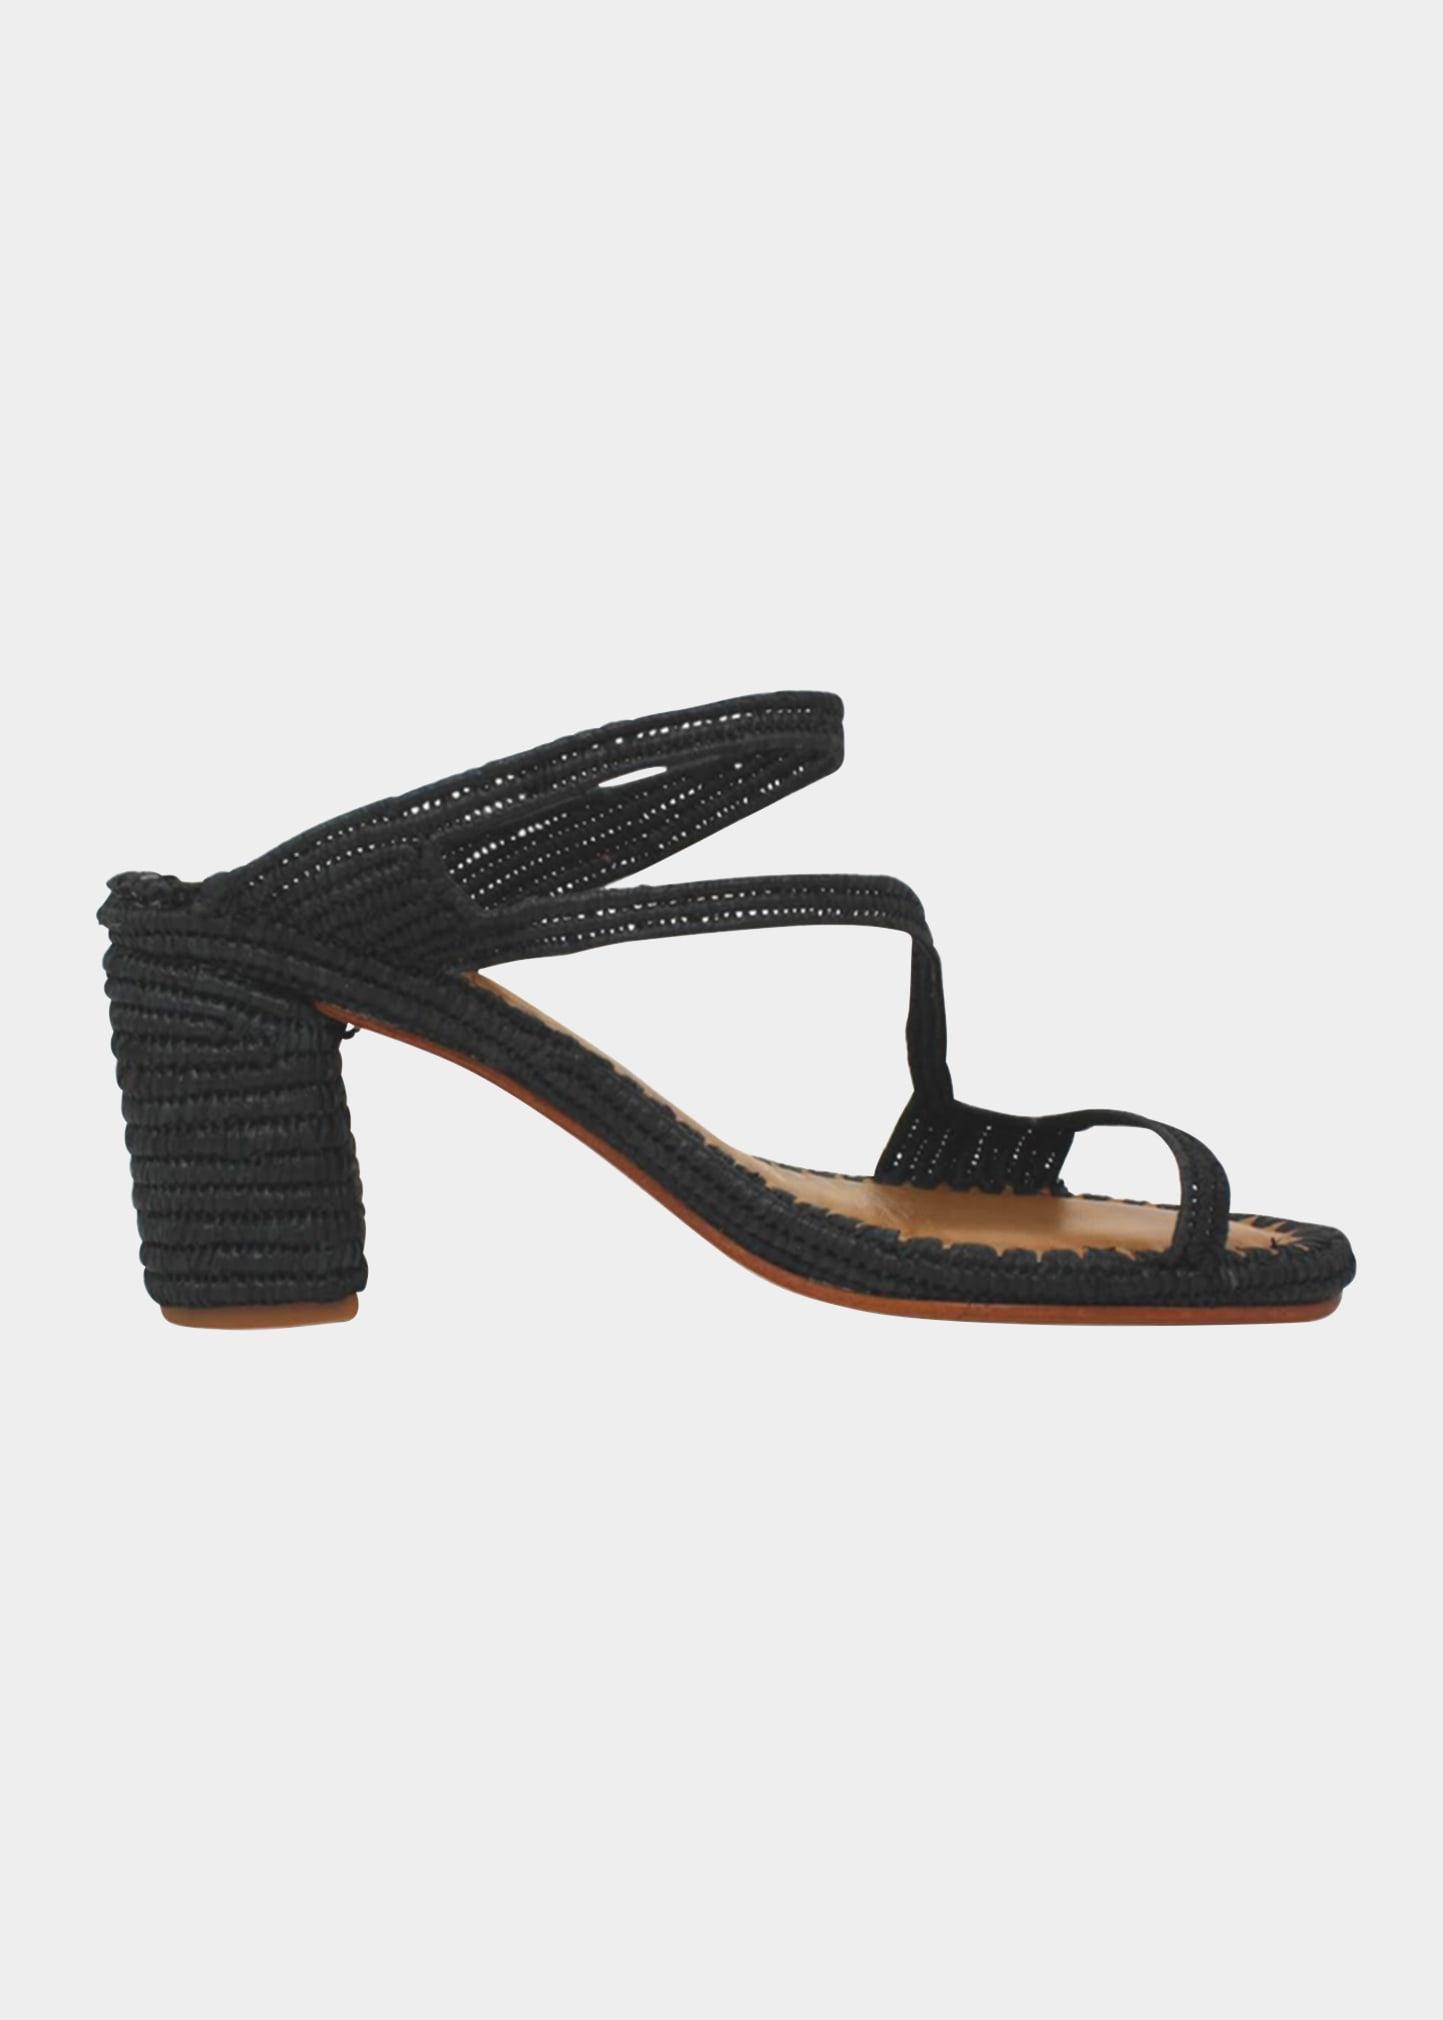 Carrie Forbes Salah Woven Raffia Sandals in Black | Lyst